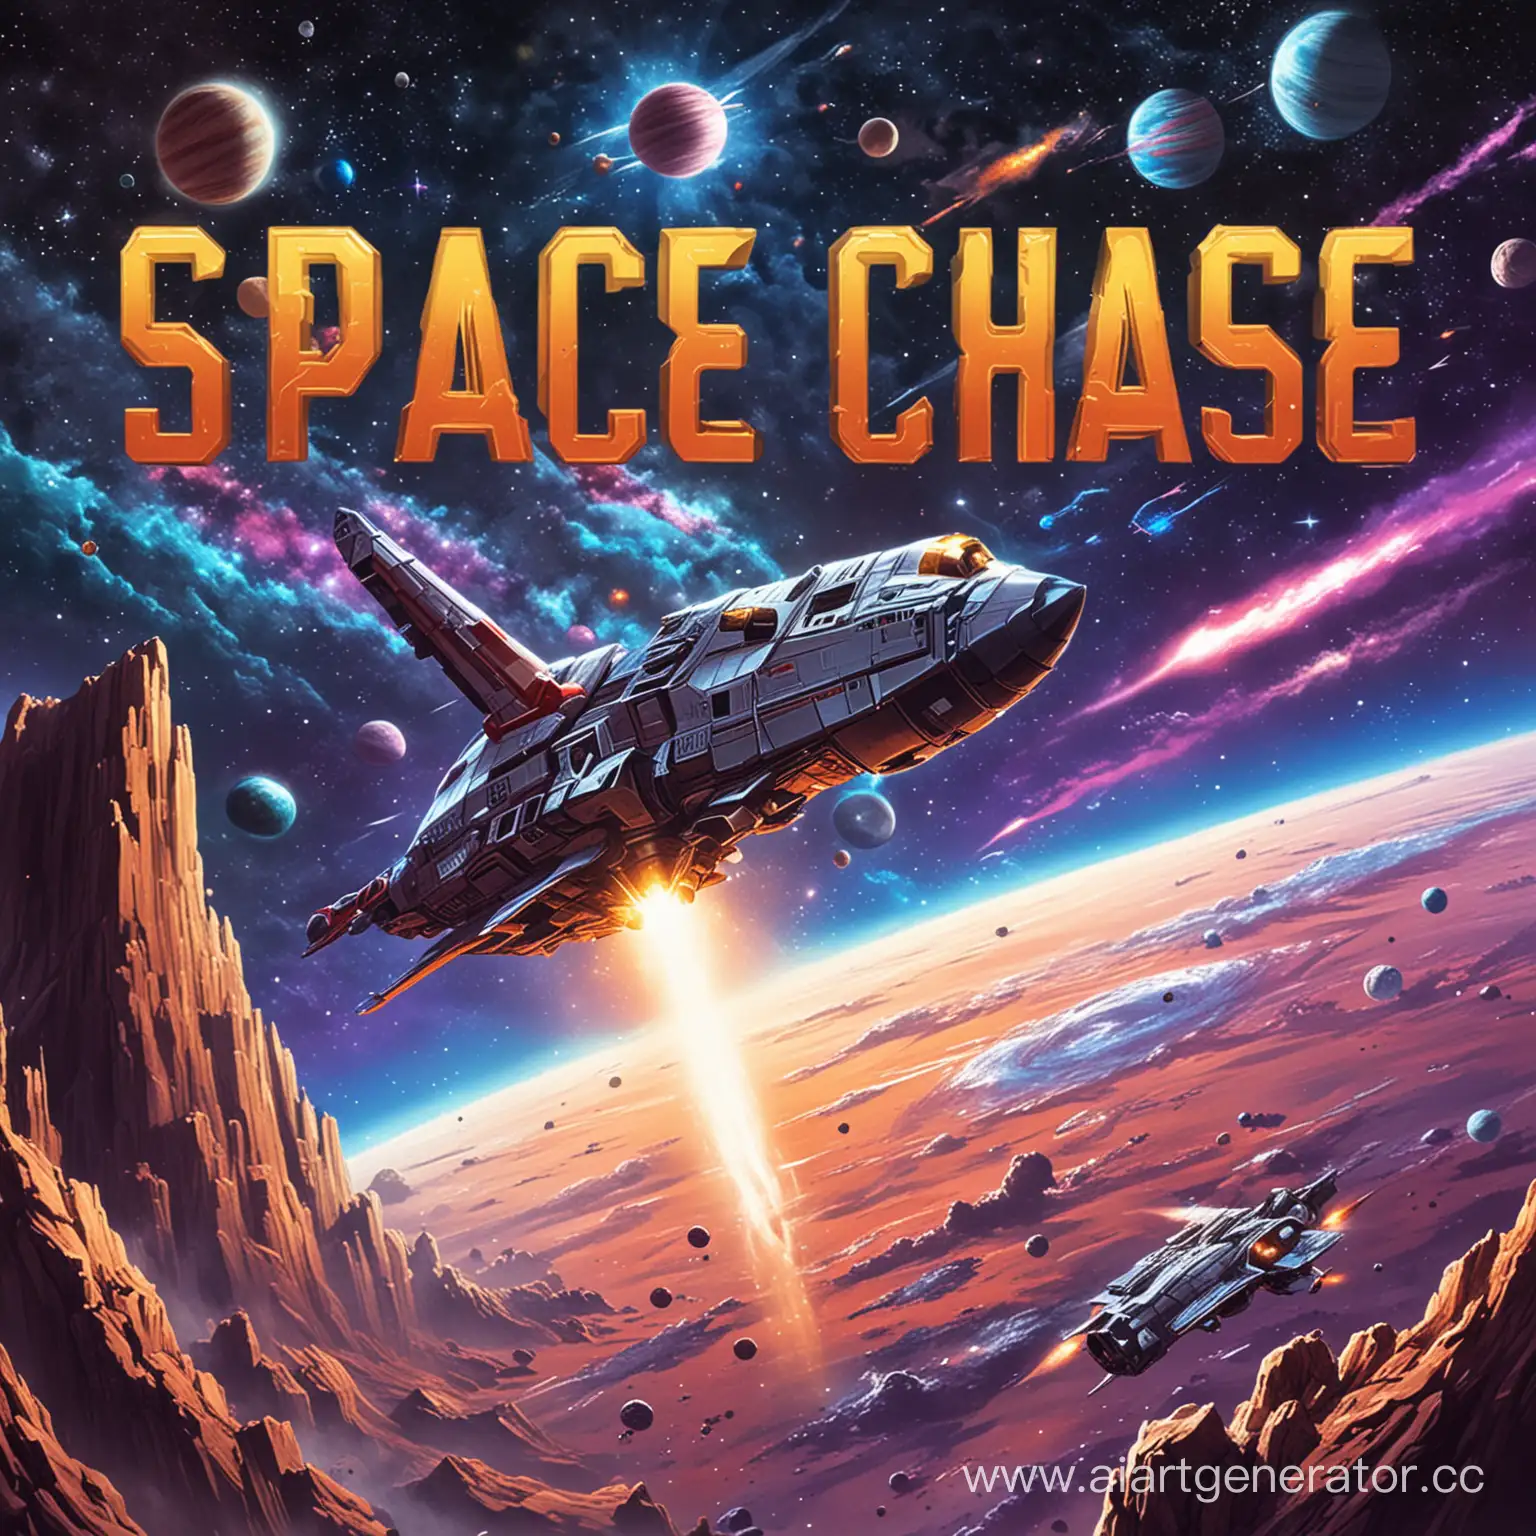 Intergalactic-Space-Chase-Epic-Pursuit-Across-Star-Systems